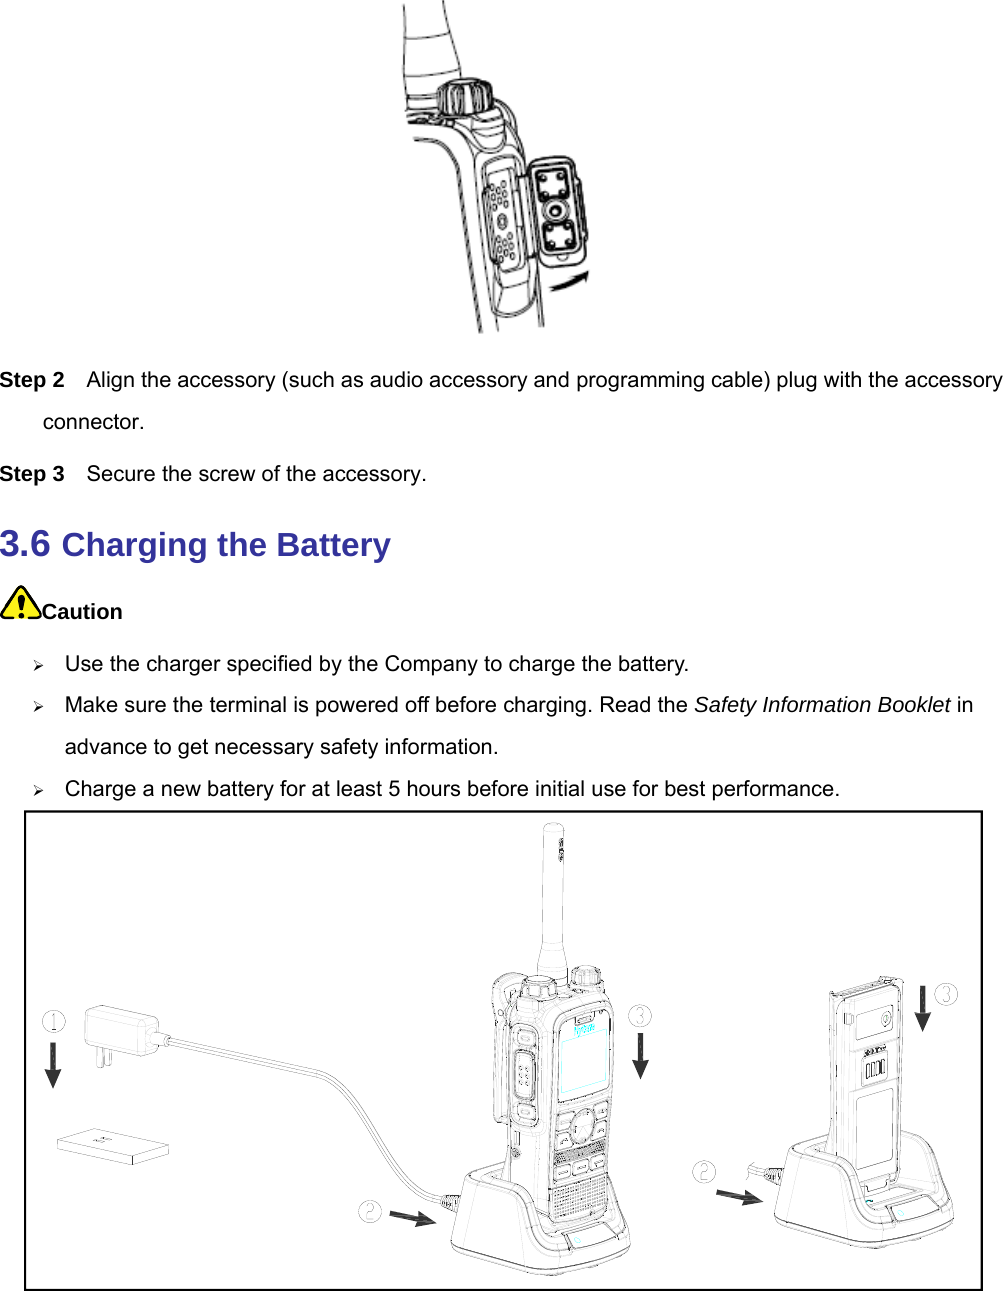   Step 2  Align the accessory (such as audio accessory and programming cable) plug with the accessory connector.  Step 3  Secure the screw of the accessory.   3.6 Charging the Battery Caution  Use the charger specified by the Company to charge the battery.    Make sure the terminal is powered off before charging. Read the Safety Information Booklet in advance to get necessary safety information.    Charge a new battery for at least 5 hours before initial use for best performance.       